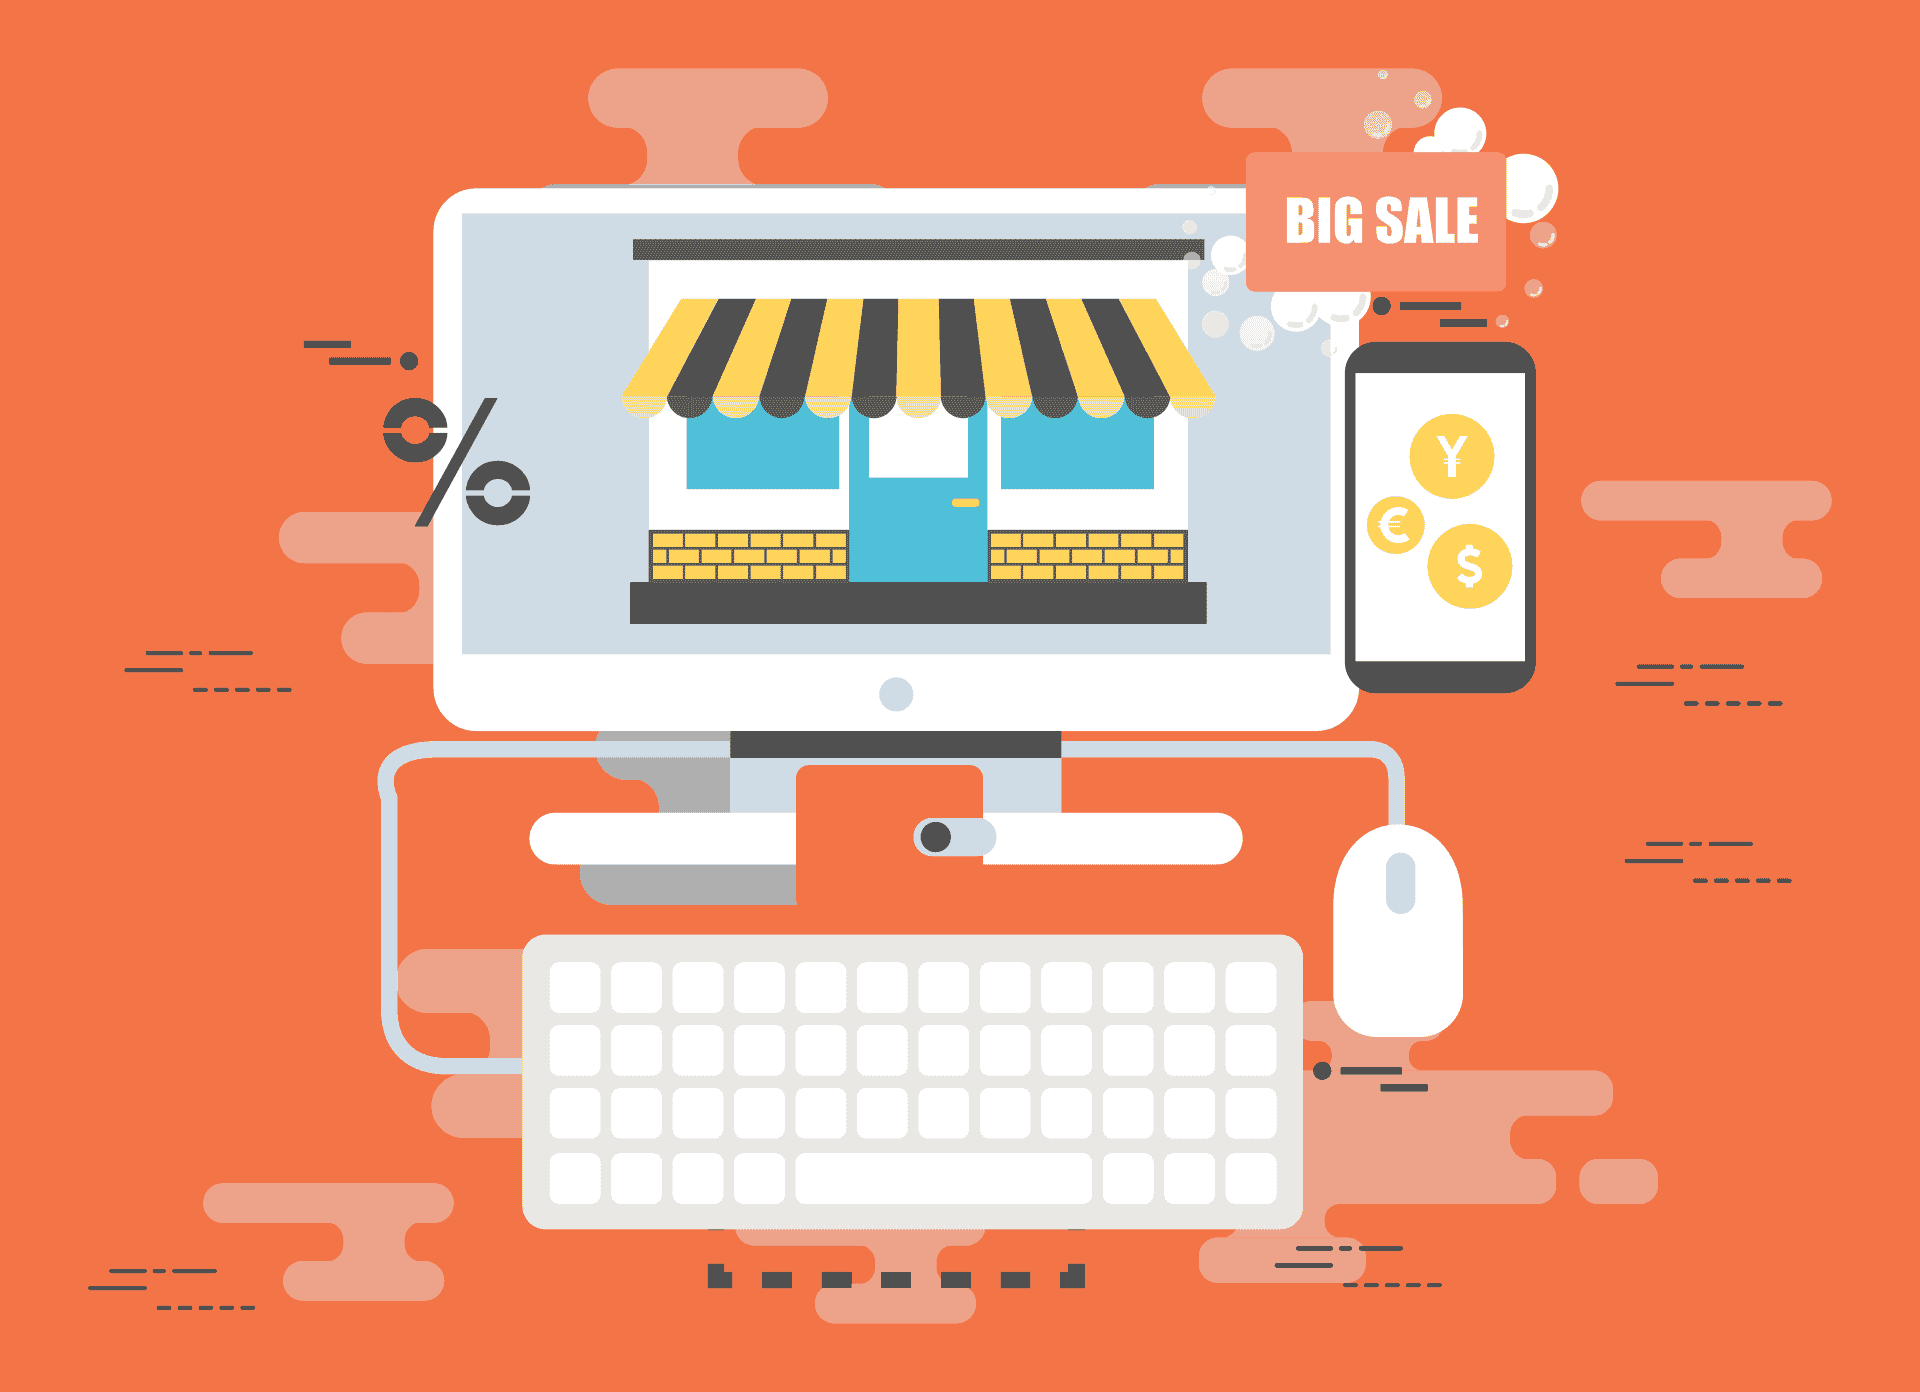 5 Must-Have Elements for Designing an eCommerce Website